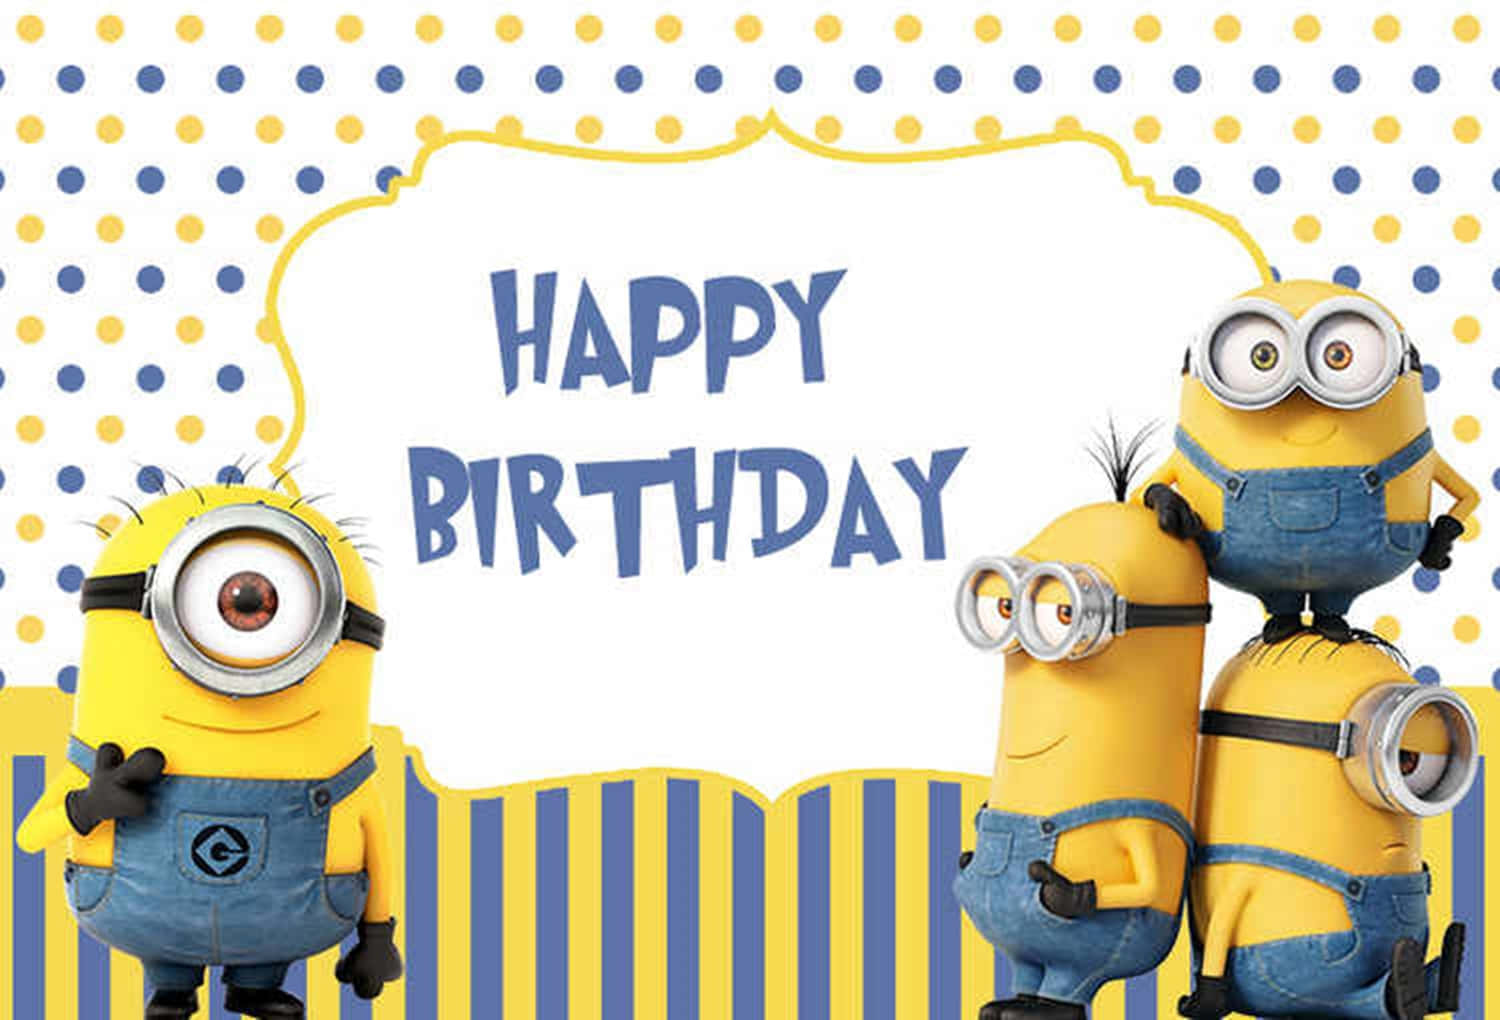 Celebrate with your Despicable Me buddies! Wallpaper